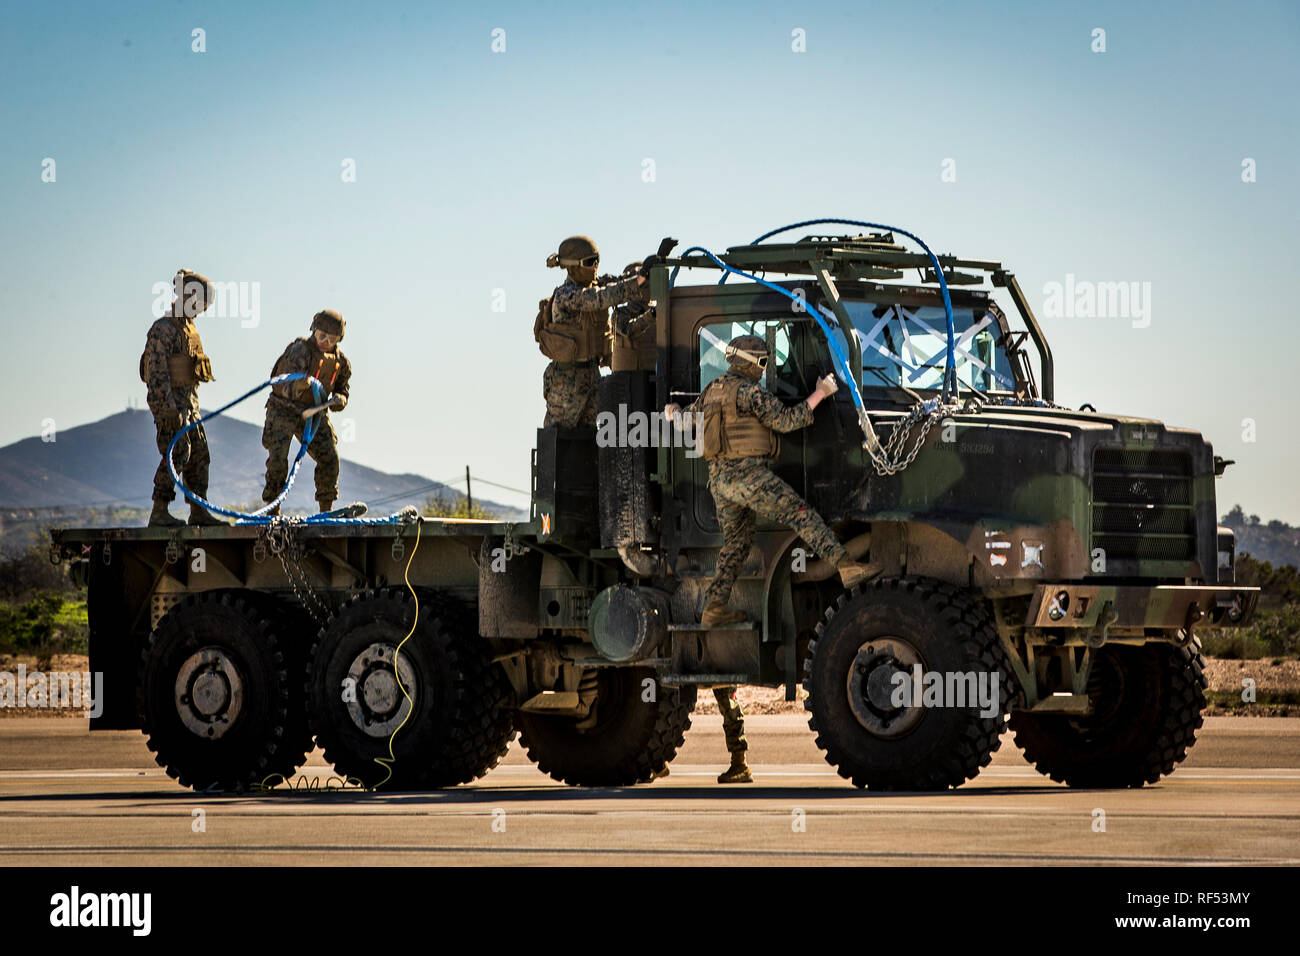 U.S. Marines with 1st Transportation Support Battalion, 1st Marine Logistics Group, prepare to conduct a Helicopter Support Team (HST) training exercise at Marine Corps Air Station Miramar, California, Jan. 22, 2019. The training was executed to employ an HST and CH-53E Super Stallion to lift a Medium Tactical Vehicle Replacement truck for transportation. (U.S. Marine Corps photo by Lance Cpl. Betzabeth Y. Galvan) Stock Photo